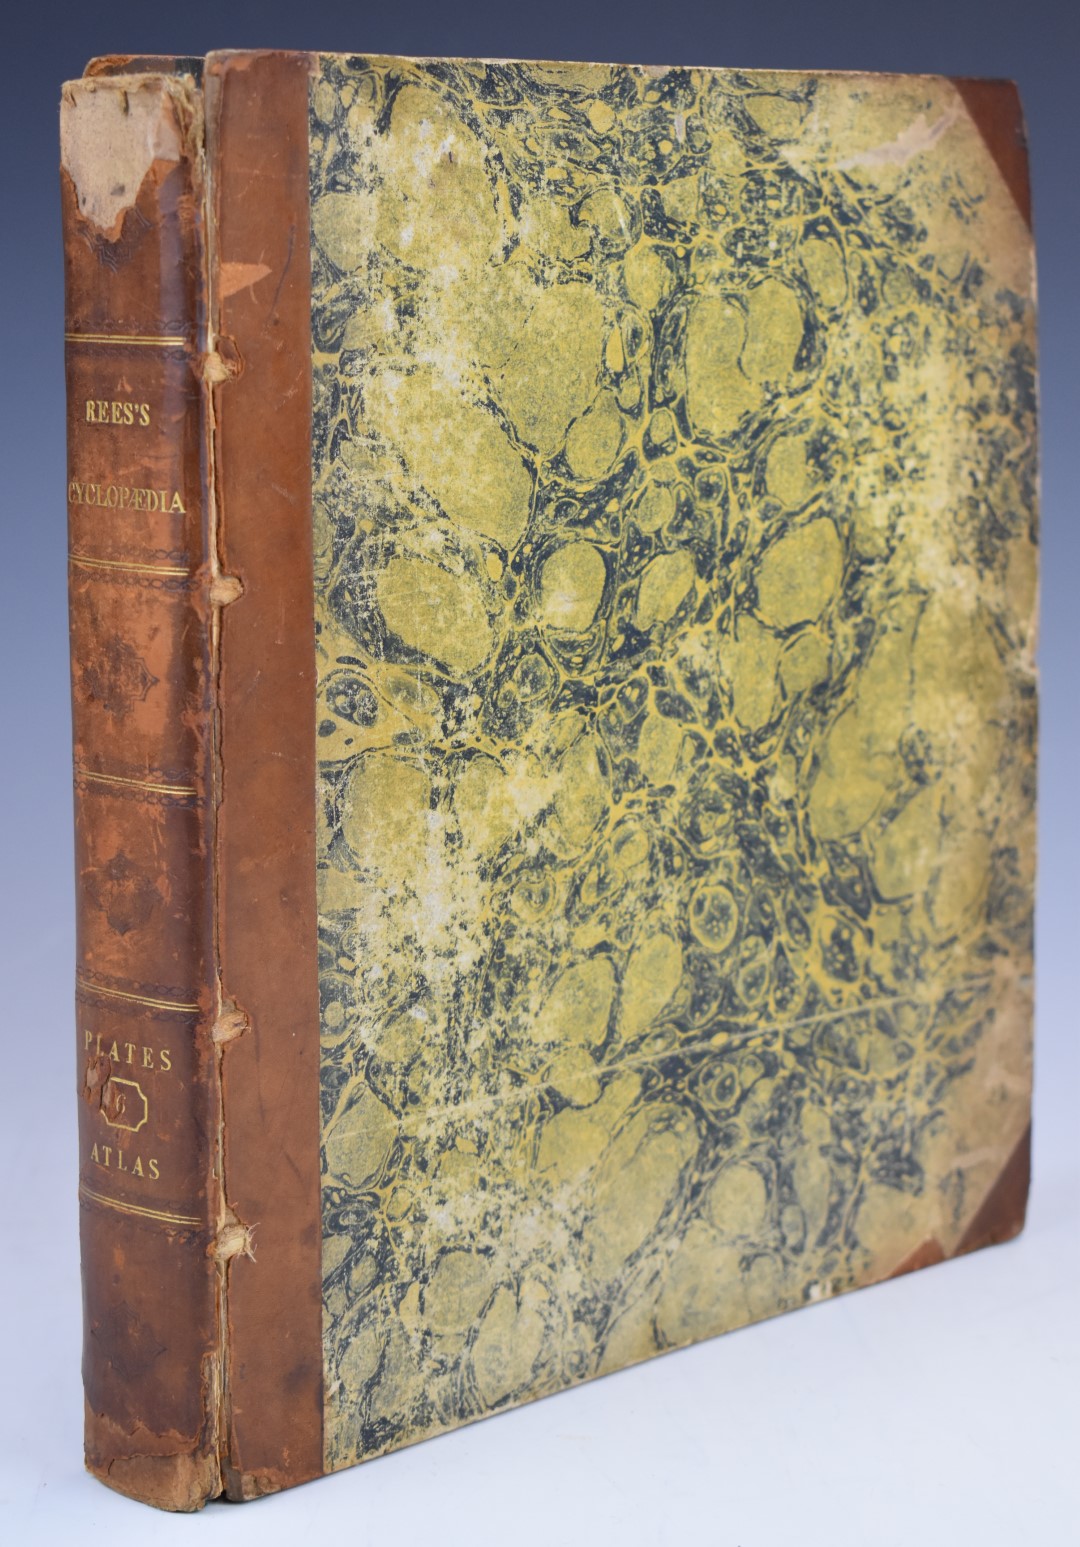 [Maps] The Cyclopaedia or Universal Dictionary of Arts, Sciences and Literature by Abraham Rees,